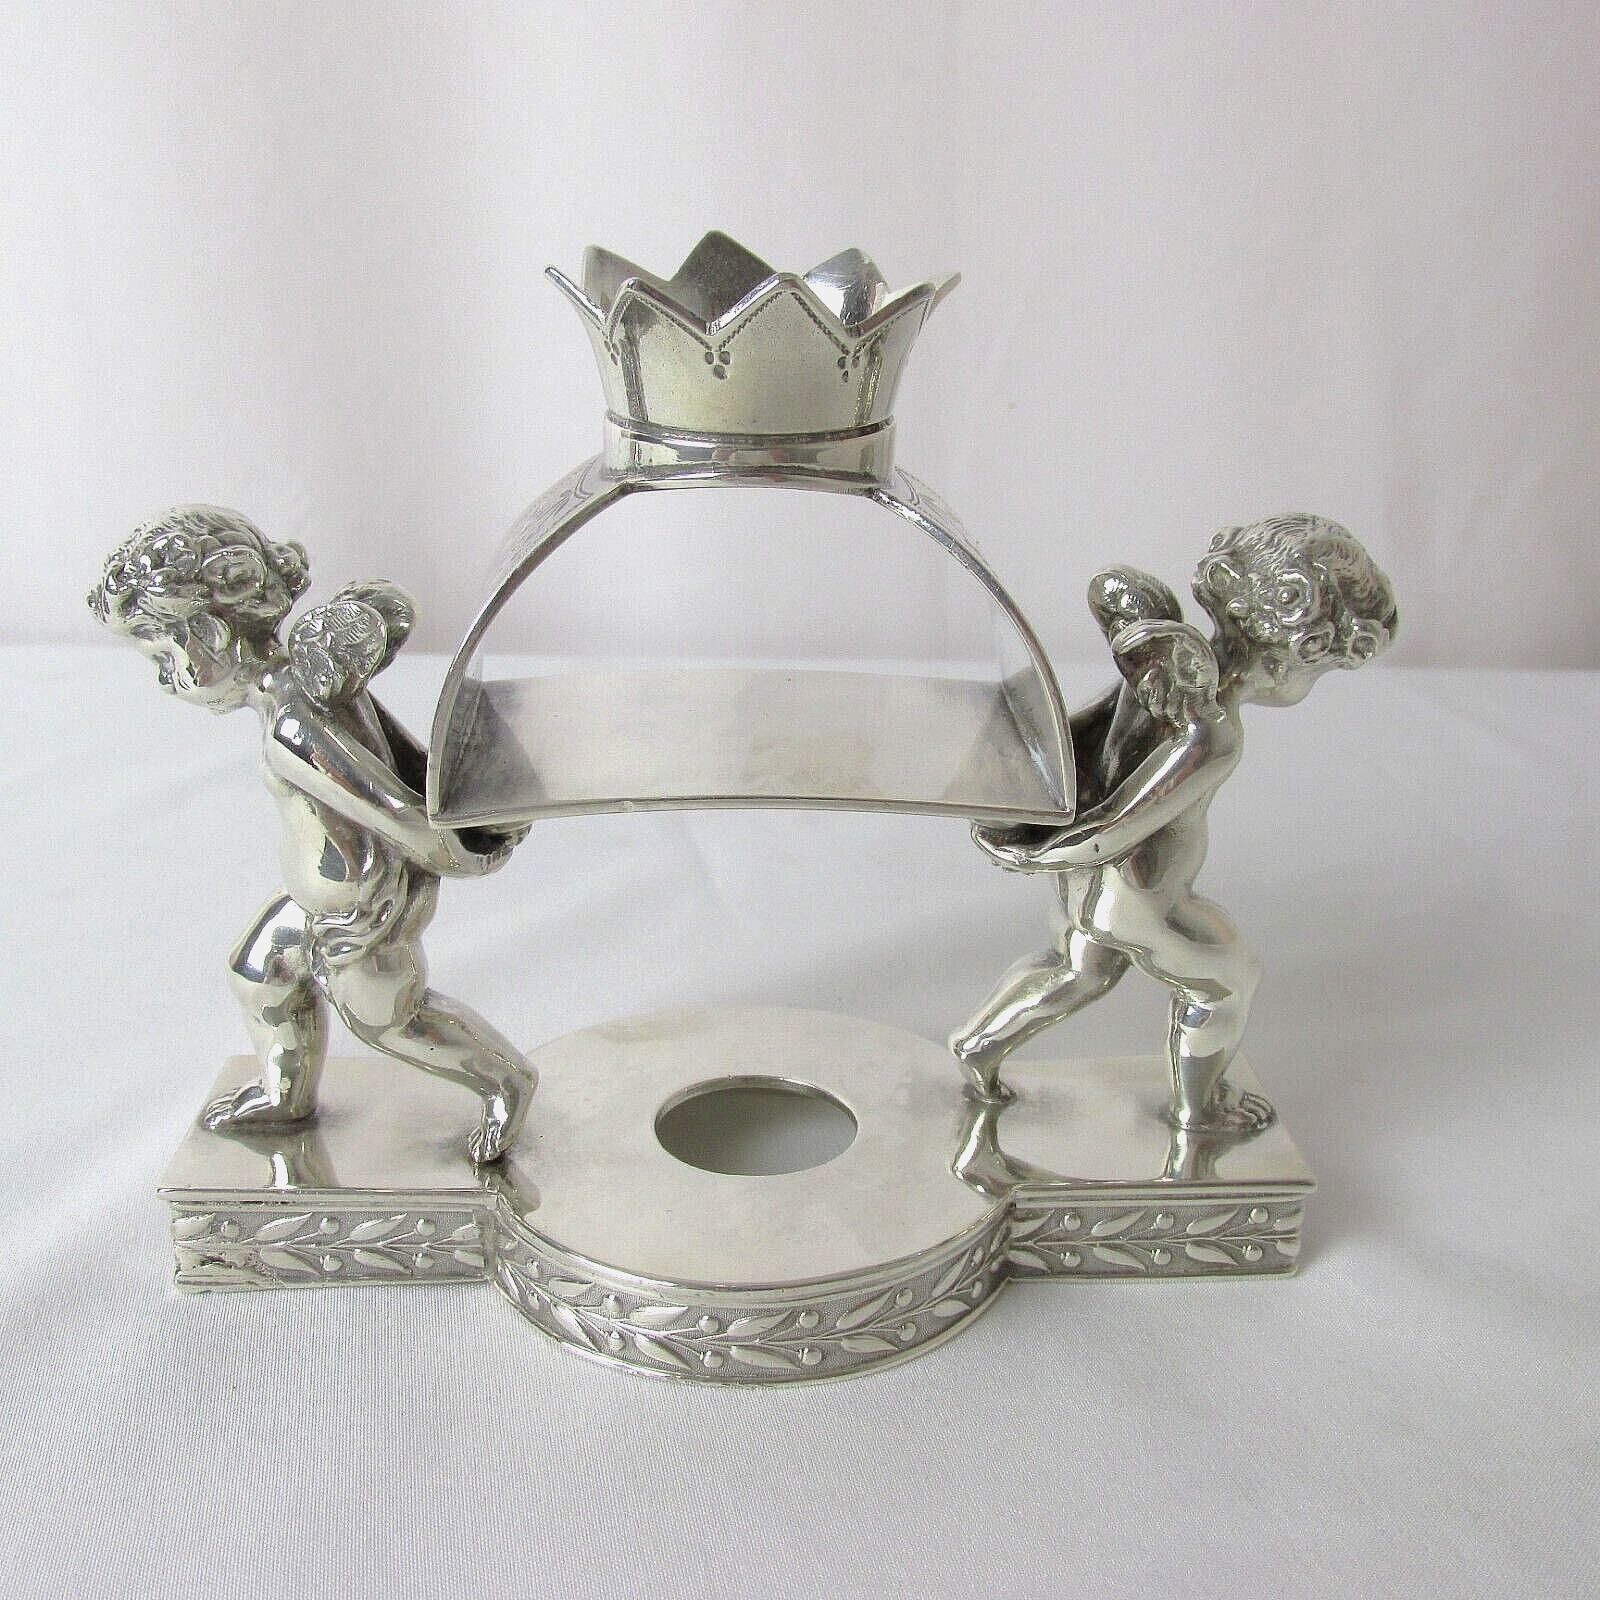 Simpson Hall Miller Silver Plated Napkin Ring Candle Holder Cherubs Circa 1880’s